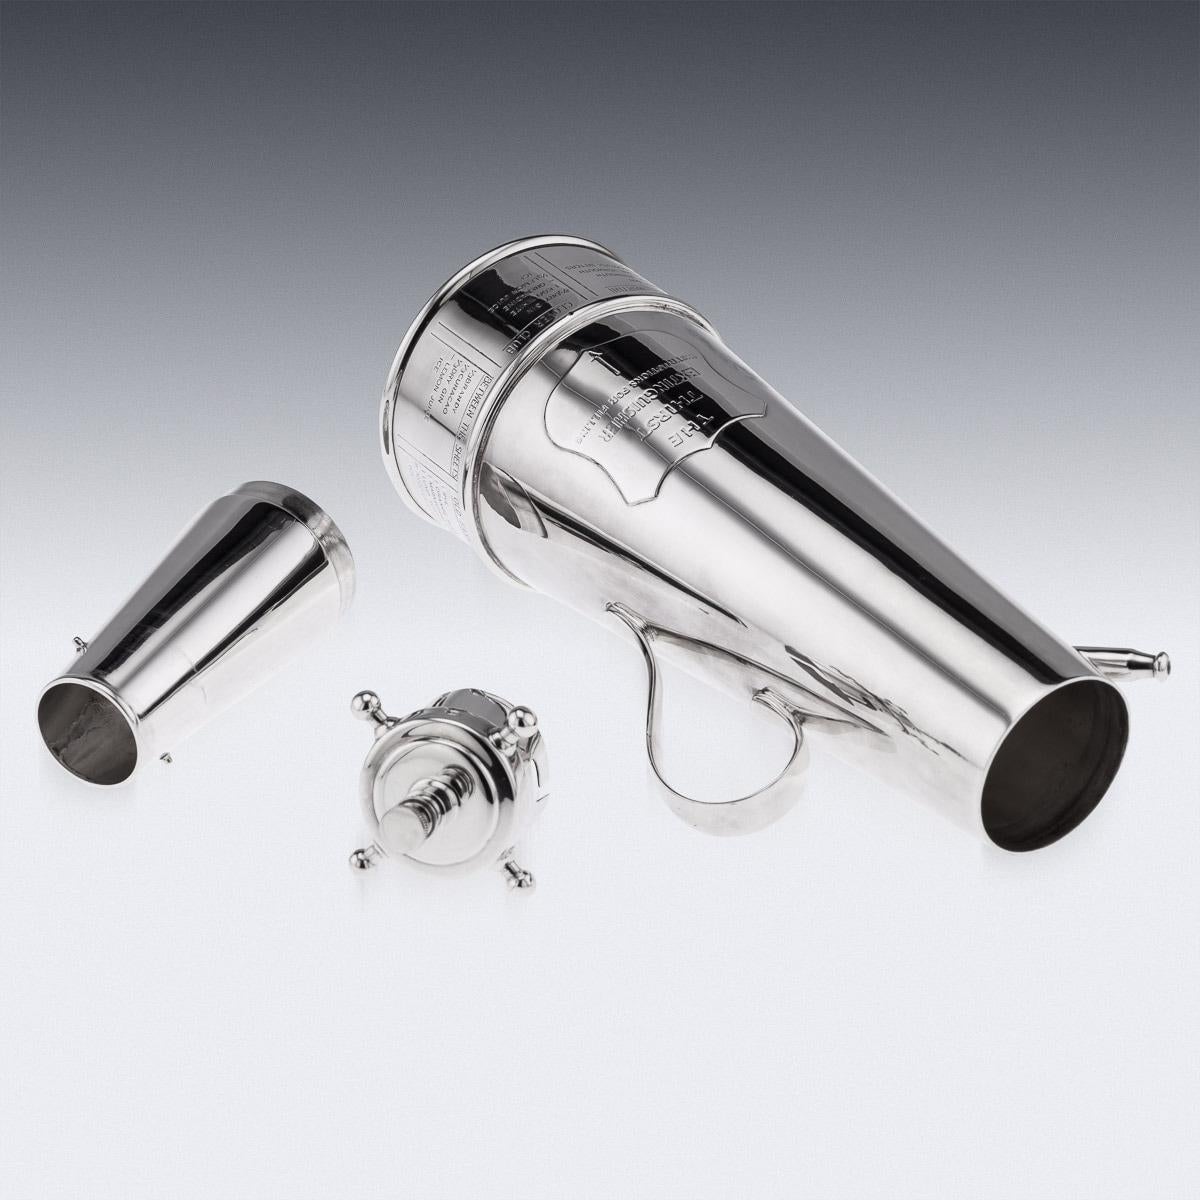 20th Century 'The Thirst Extinguisher' Silver Plated Cocktail Shaker, Asprey & Co, c.1930